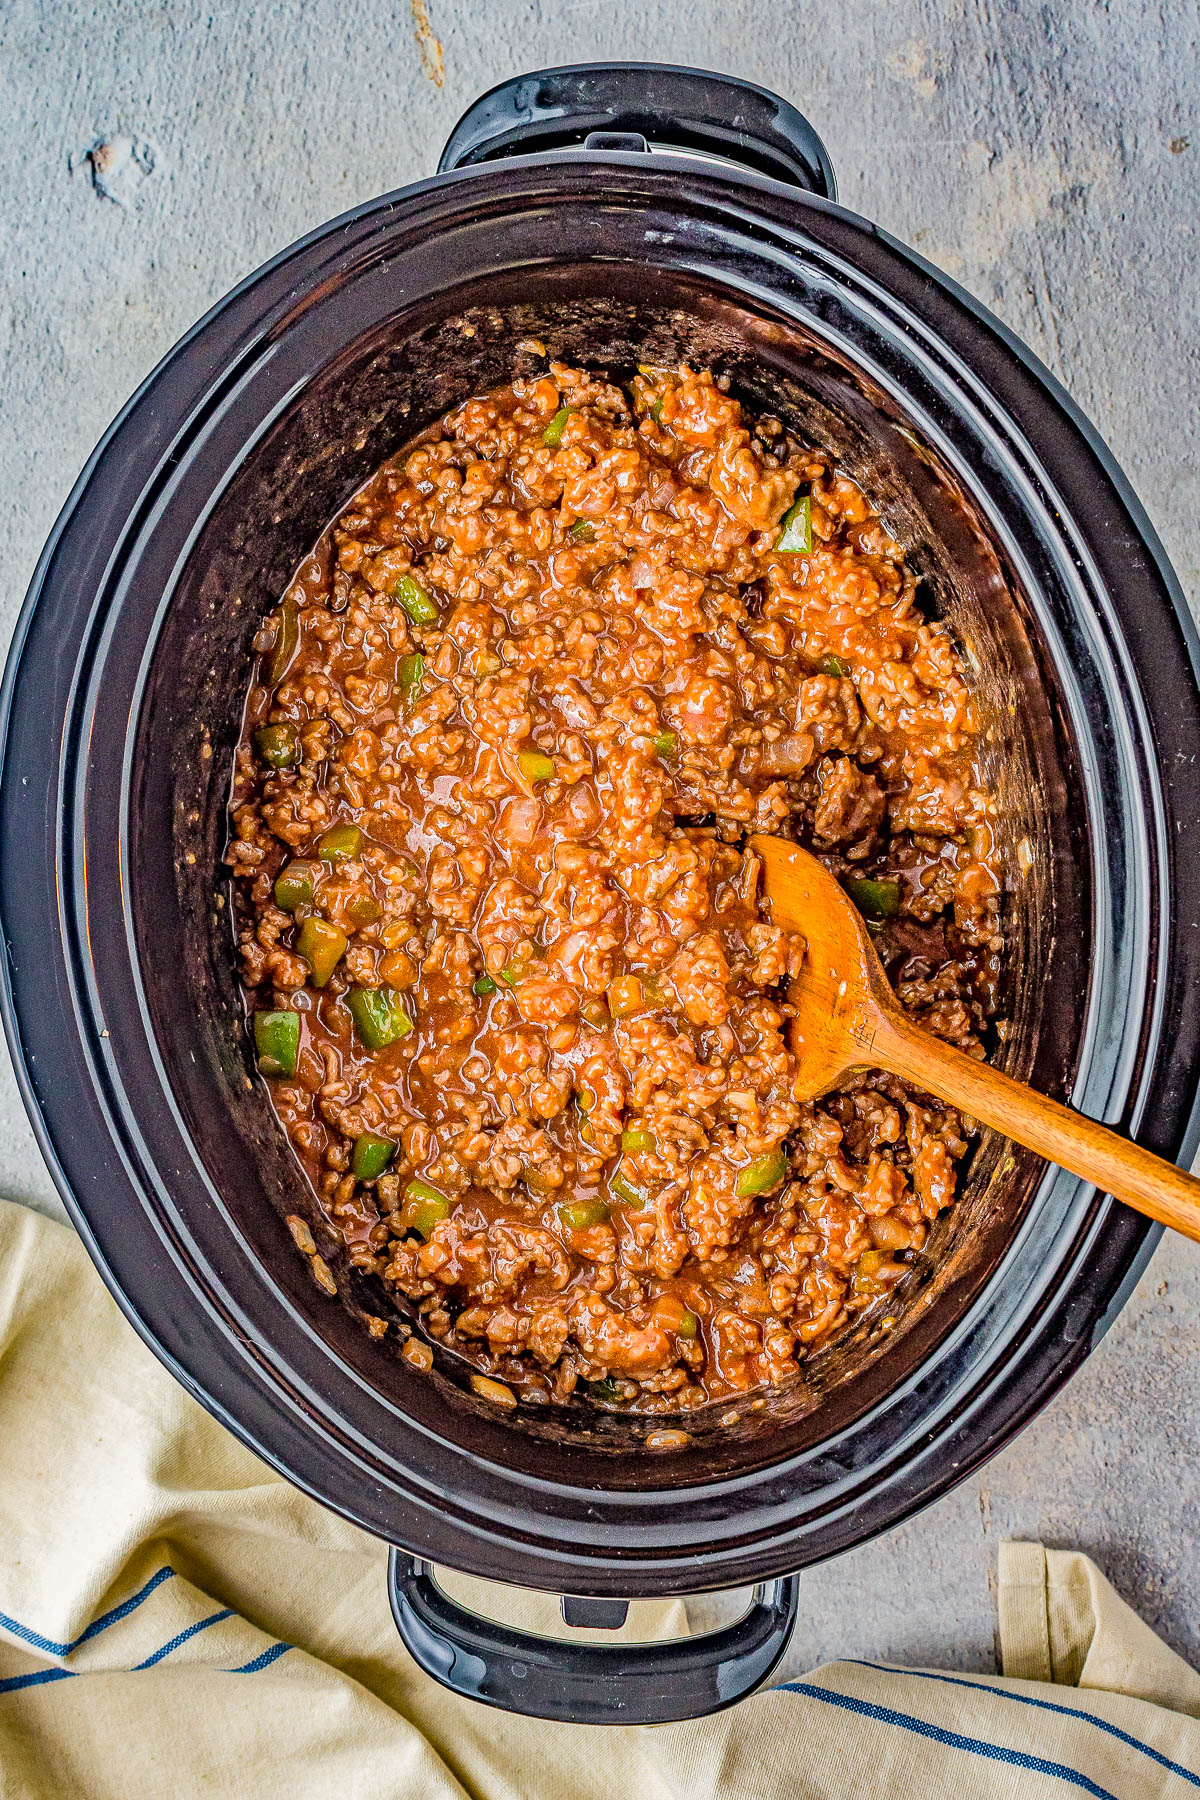 Slow Cooker Cheesy Sloppy Joes - Homemade sloppy Joes just got even better beuase they're cheesy! The perfect combination of sweet, tangy, optional spiciness, and so juicy! Whether you want to prep them before work for an easy weeknight dinner that's waiting, serve them at a summer holiday party, or for tailgating or a game day event, they're a classic family FAVORITE recipe and so EASY! Stovetop directions also provided.